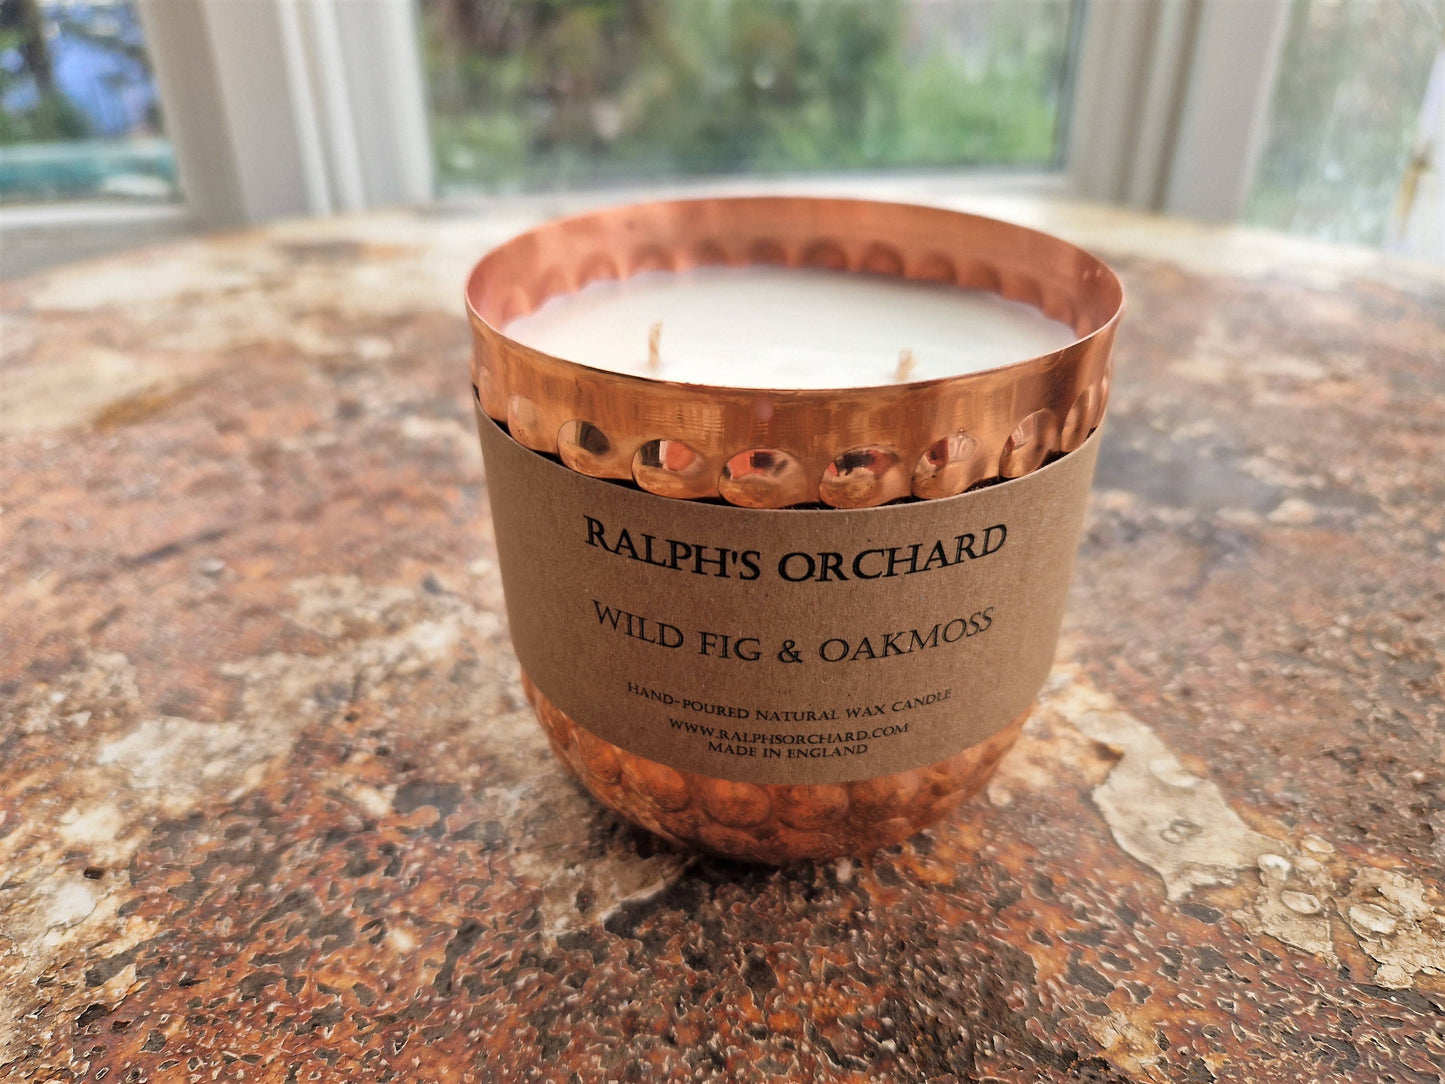 2-Wick Copper Candles - Various Scents